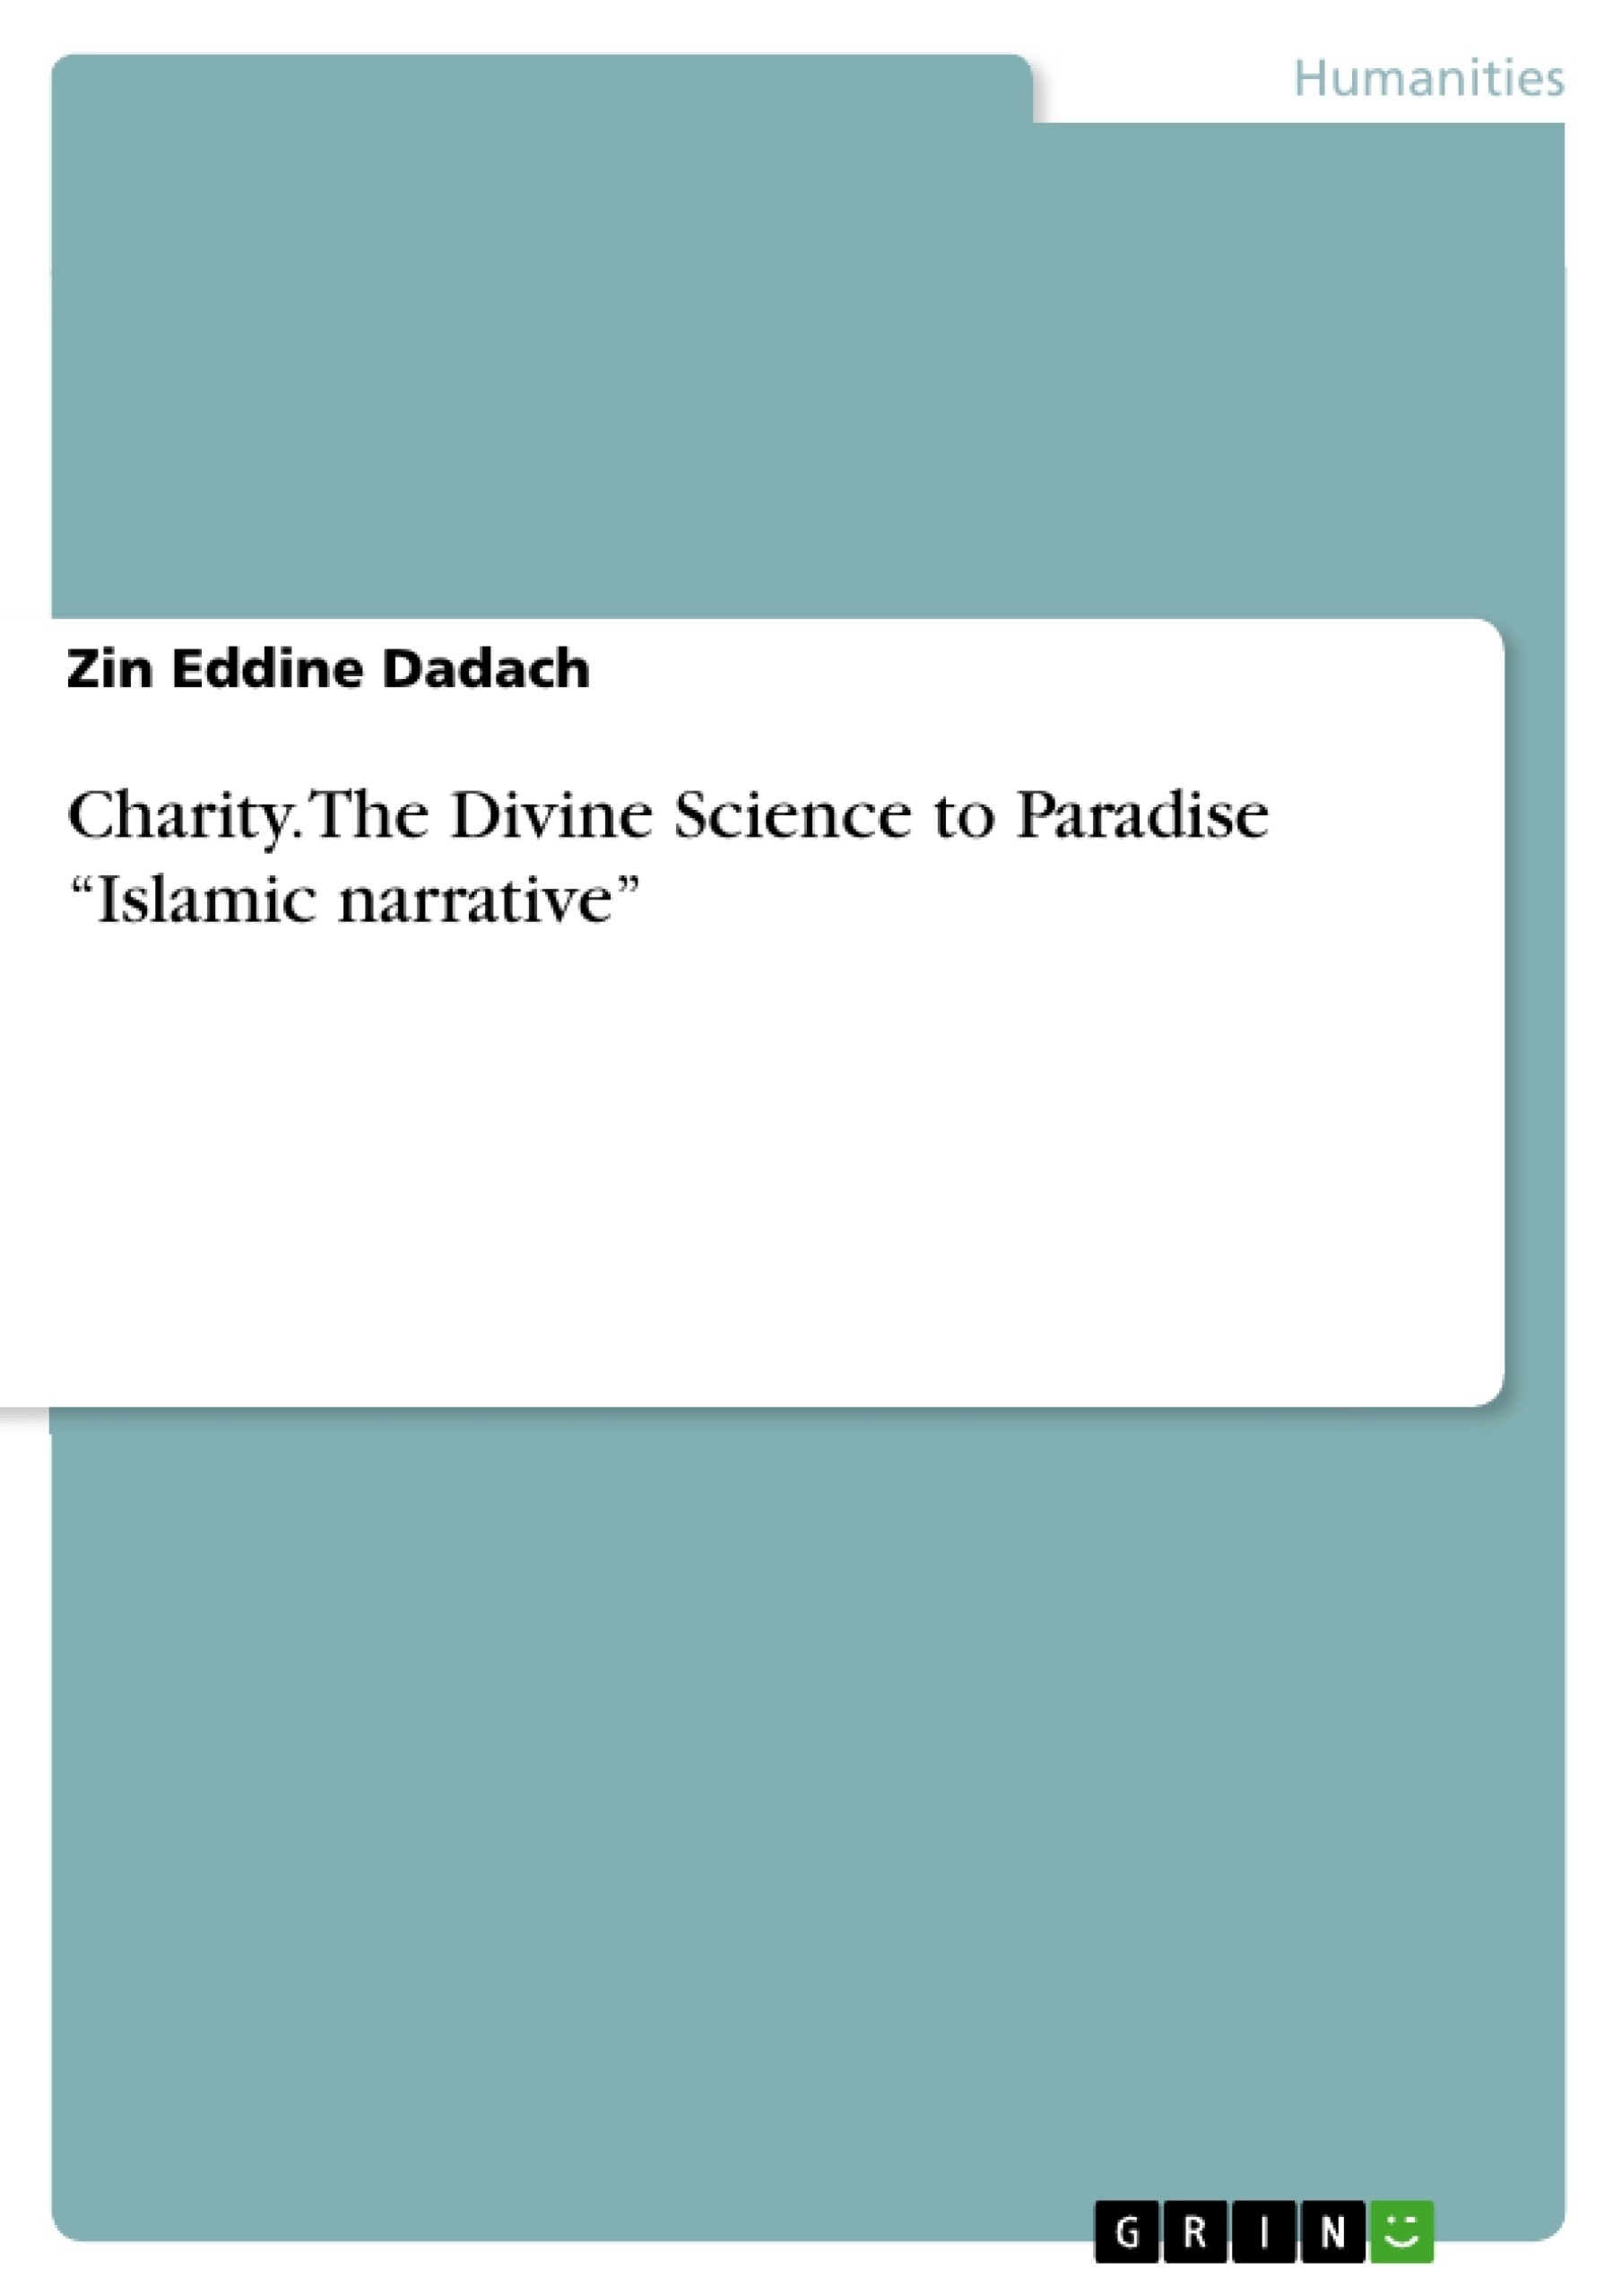 Title: Charity. The Divine Science to Paradise  “Islamic narrative”